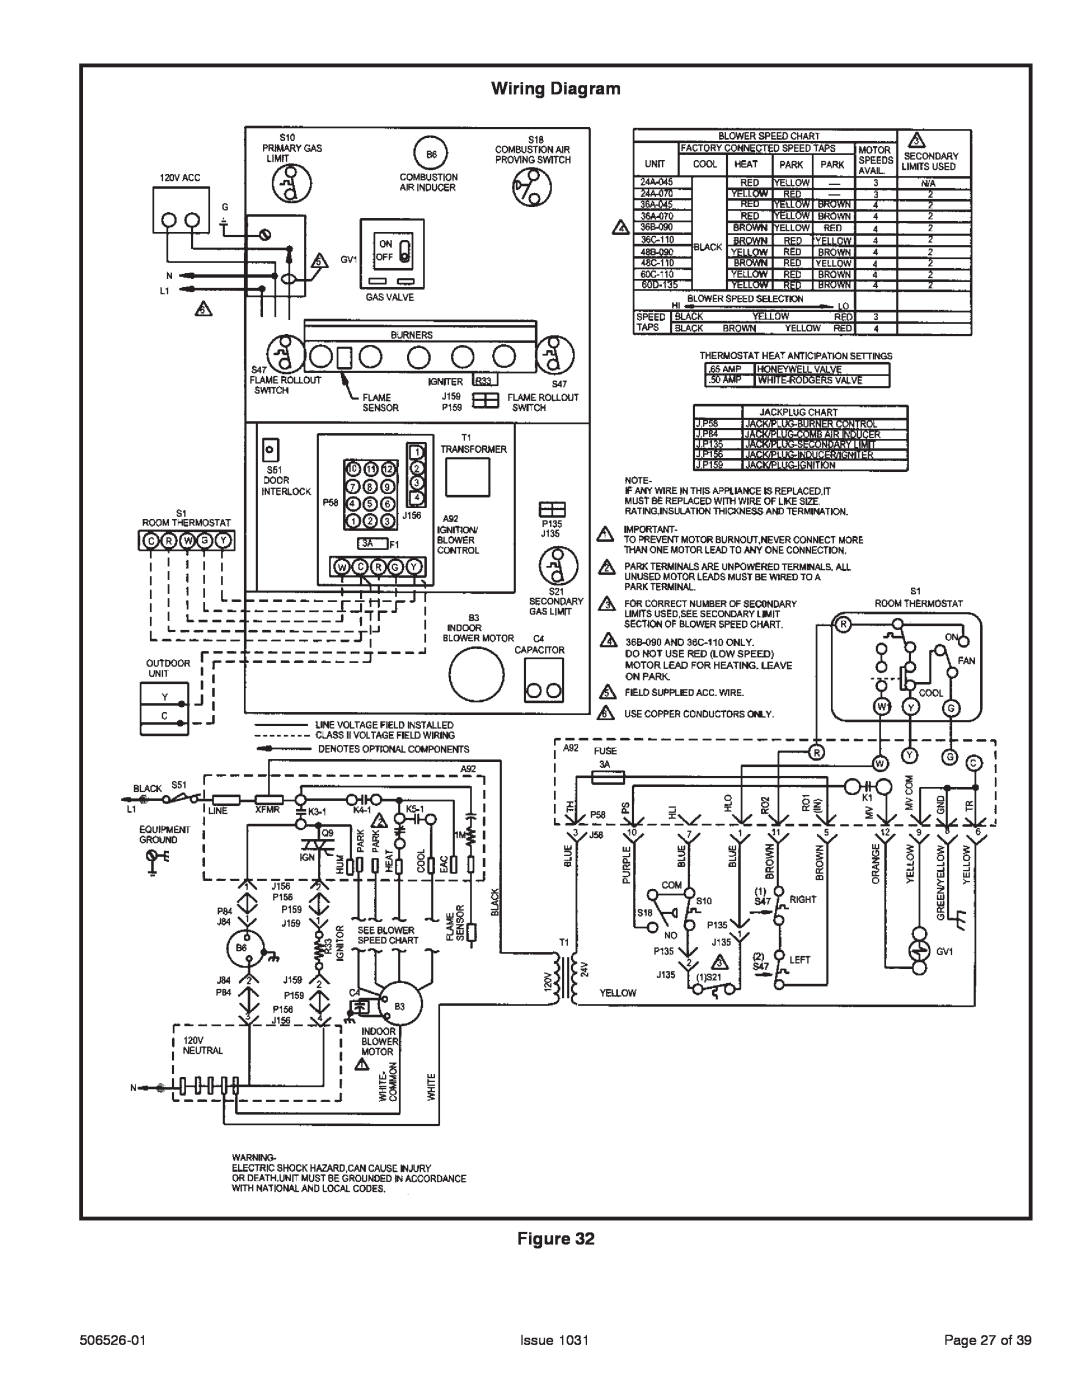 Allied Air Enterprises 80G1UH, A80UH installation instructions Wiring Diagram Figure, Issue, Page 27 of, 506526-01 